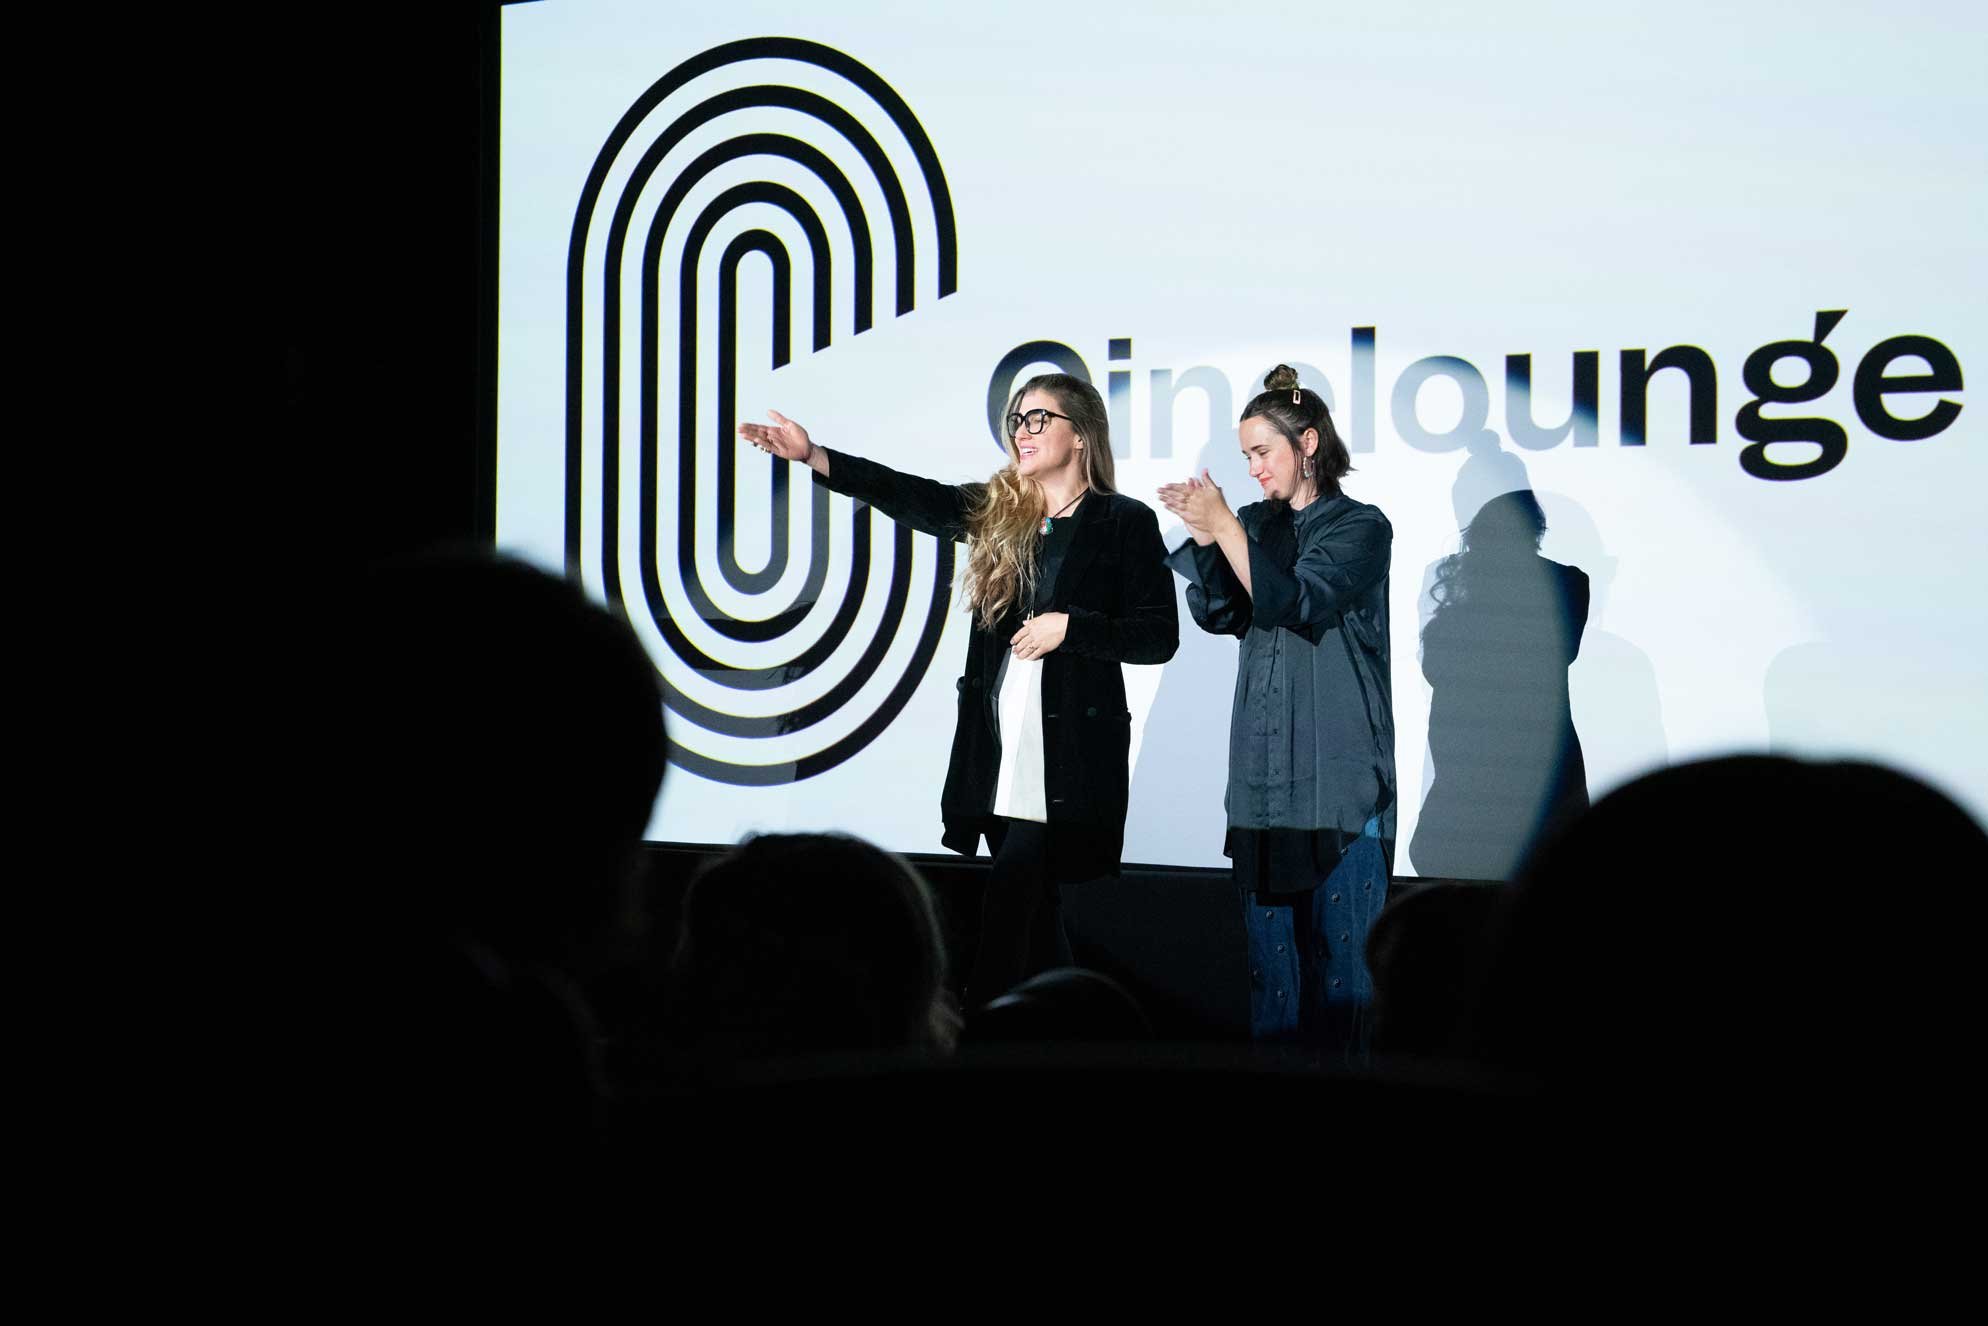  Writer/Directors Machete Bang Bang &amp; Erin Granat present their film "Moon Manor" to a sold-out auditorium; February 26th, 2022 - Cinelounge Cinemas Hollywood, Los Angeles. (Photo by Lynora Valdez.) 